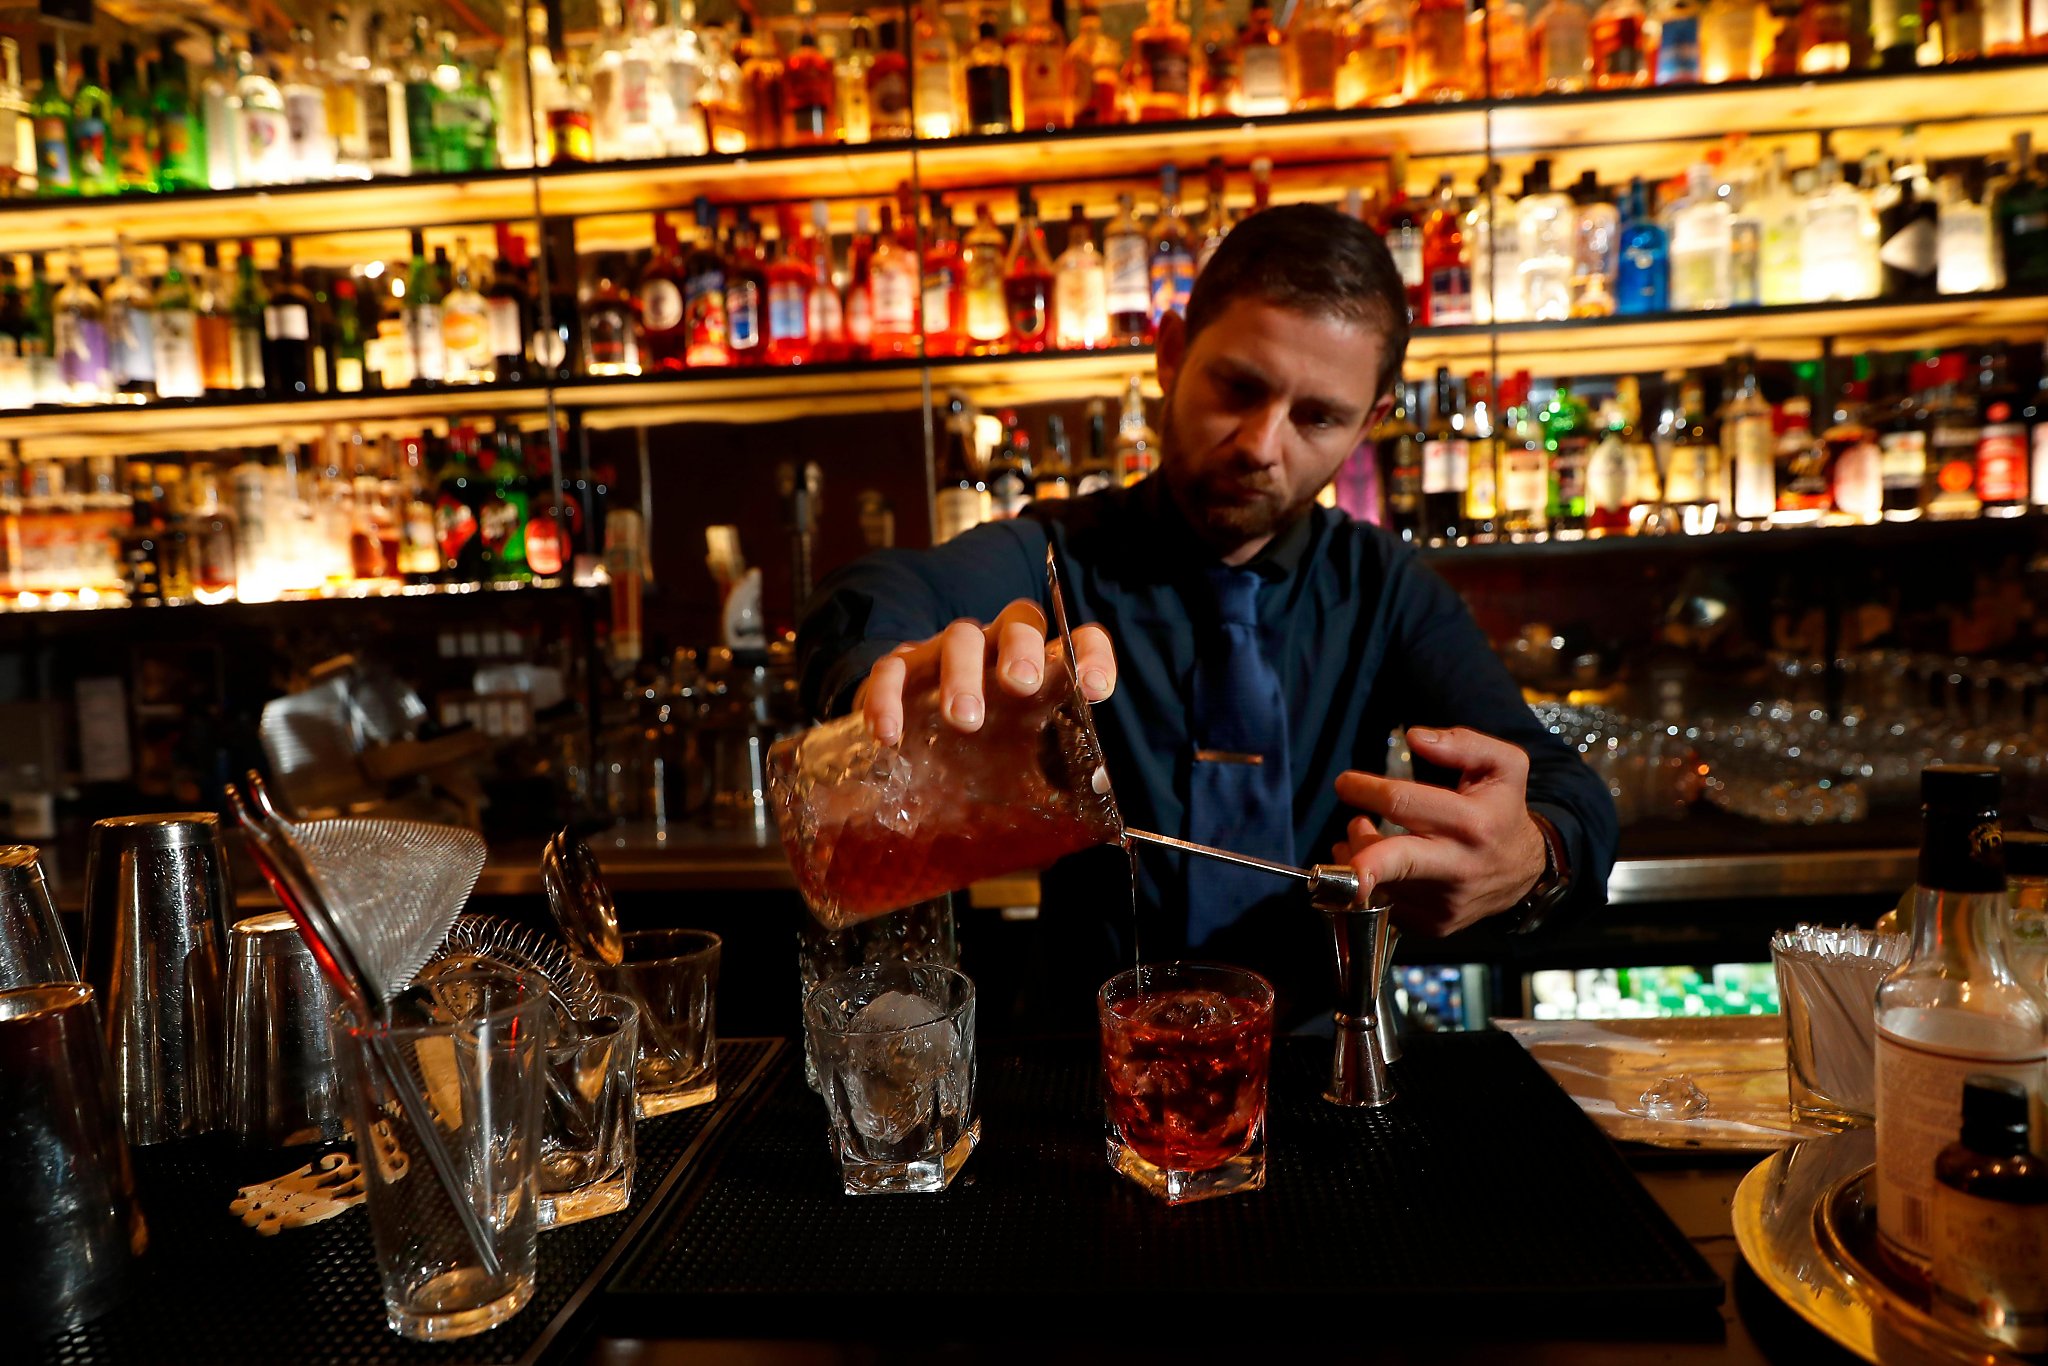 SF amaro bar finds the sweet spot of bitters - SFChronicle.com